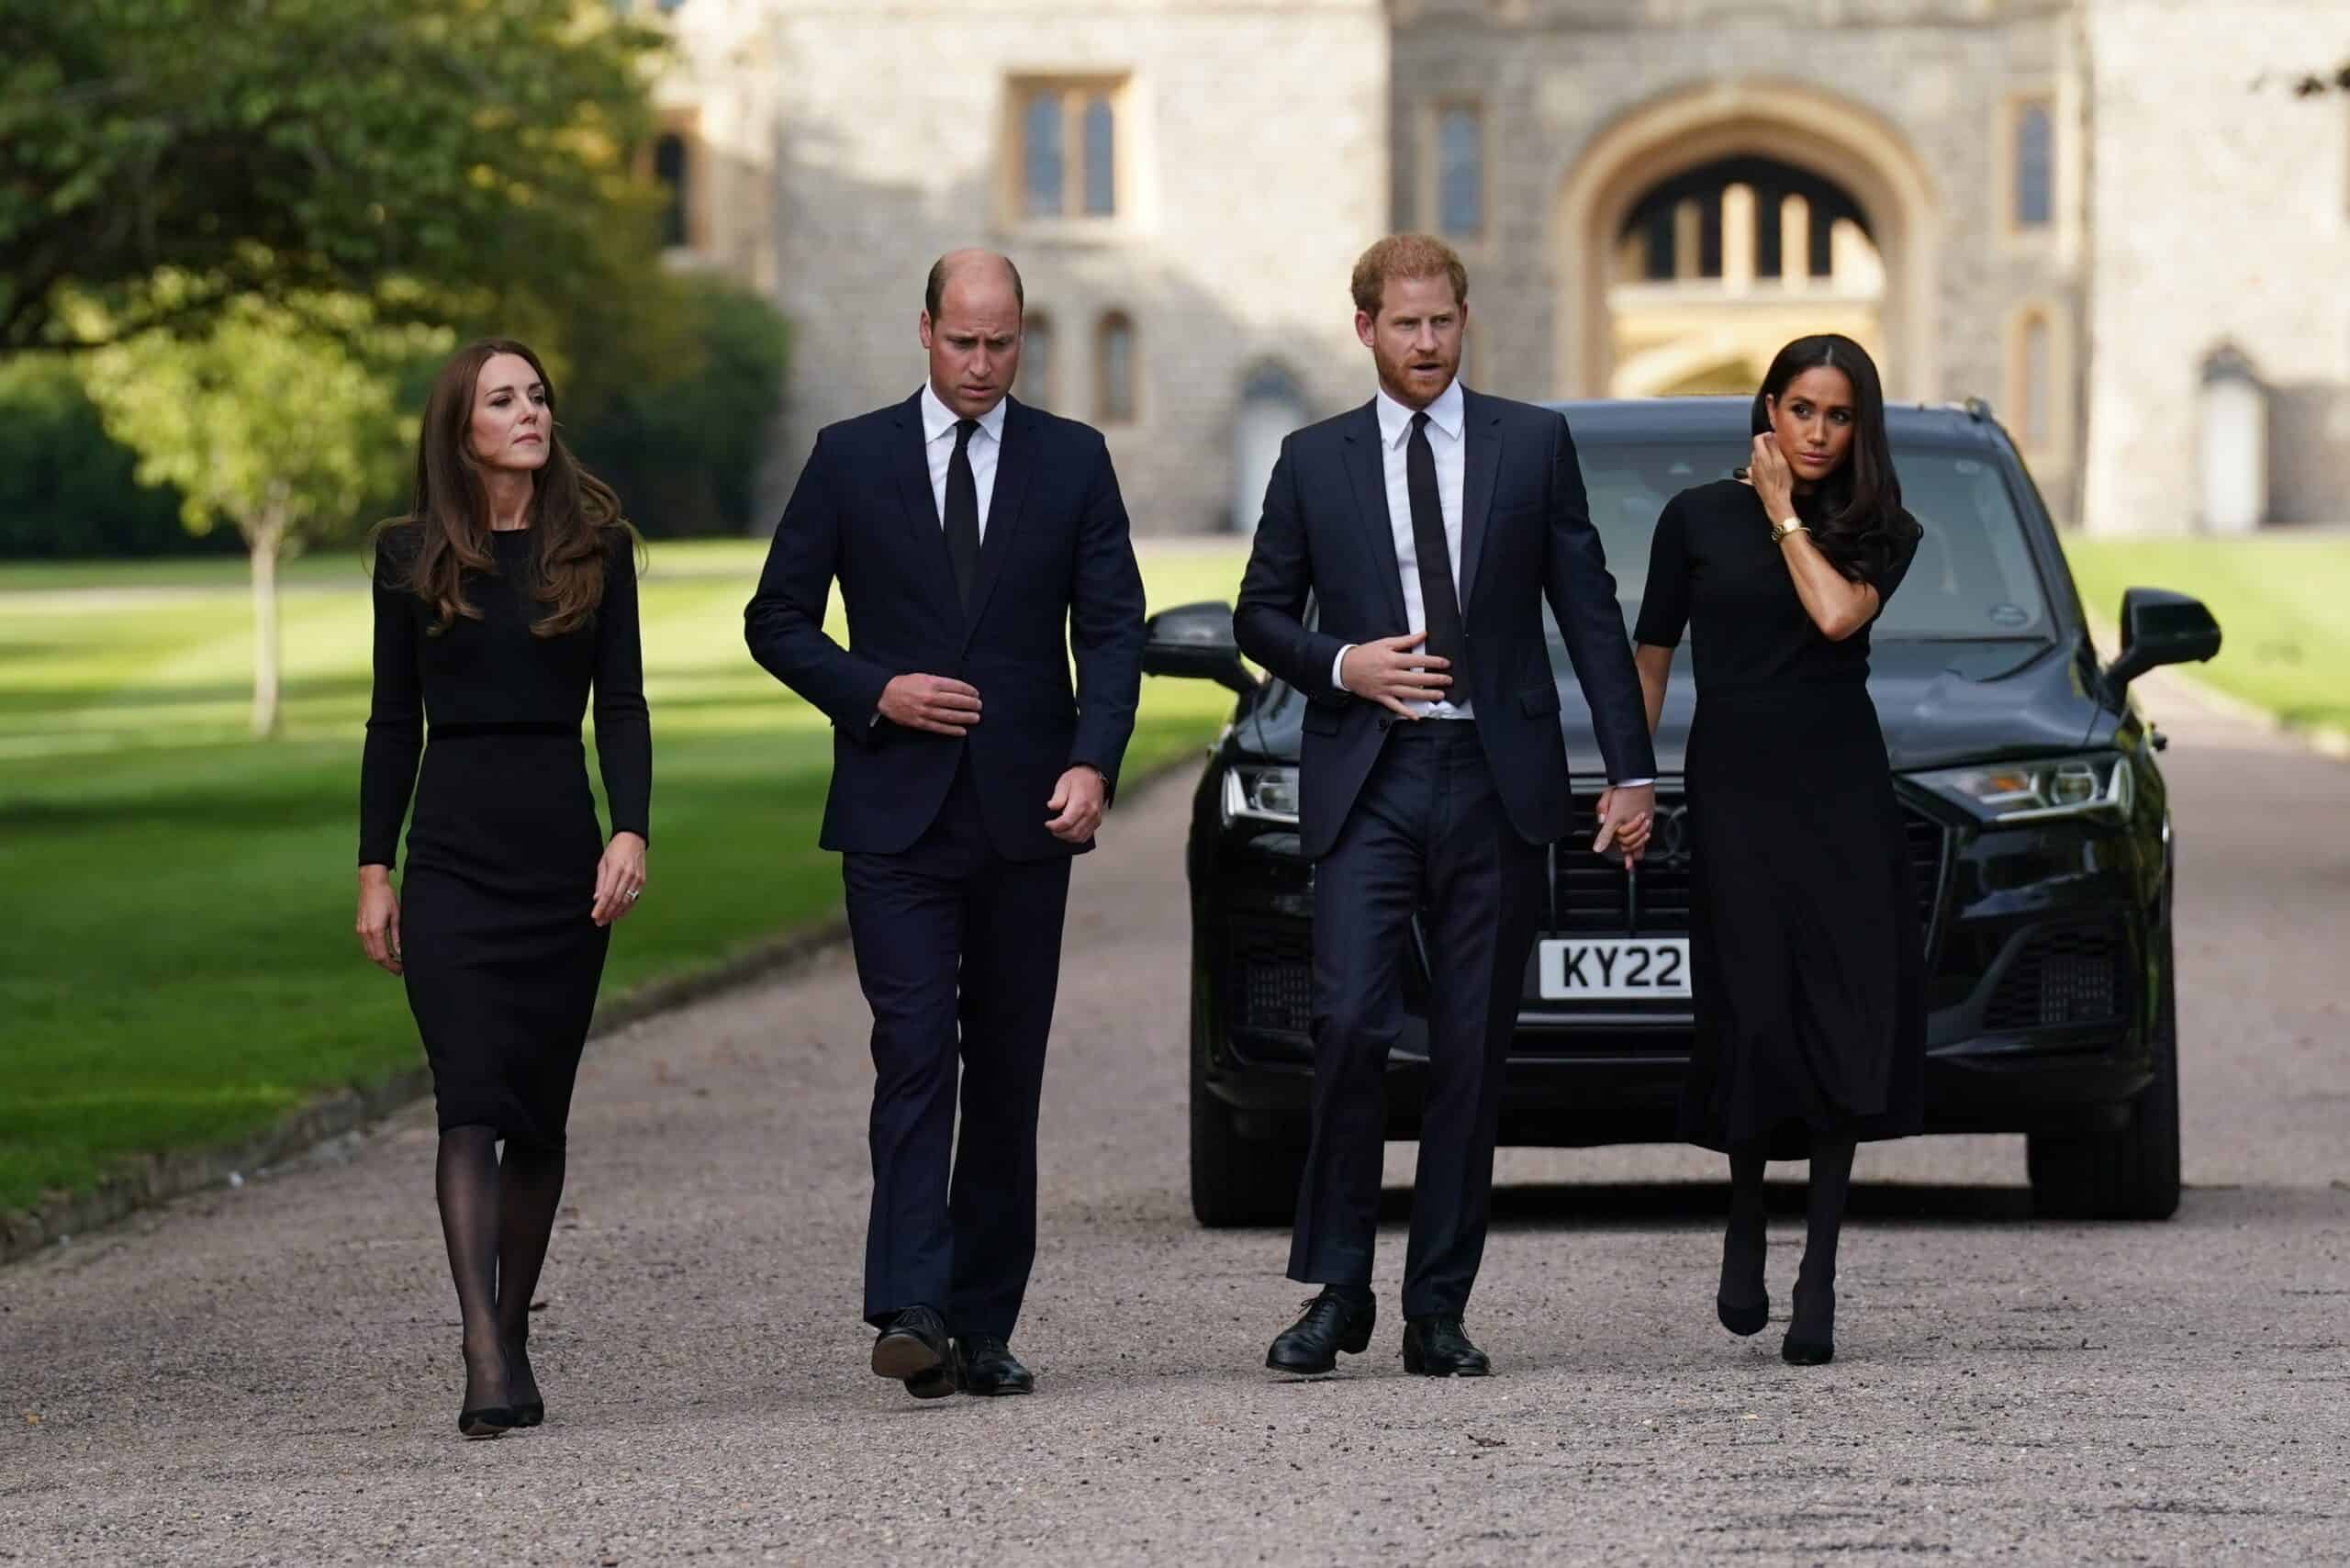 Kate ‘cold’ and William ‘snobbish’ to Meghan, new book on royal family claims